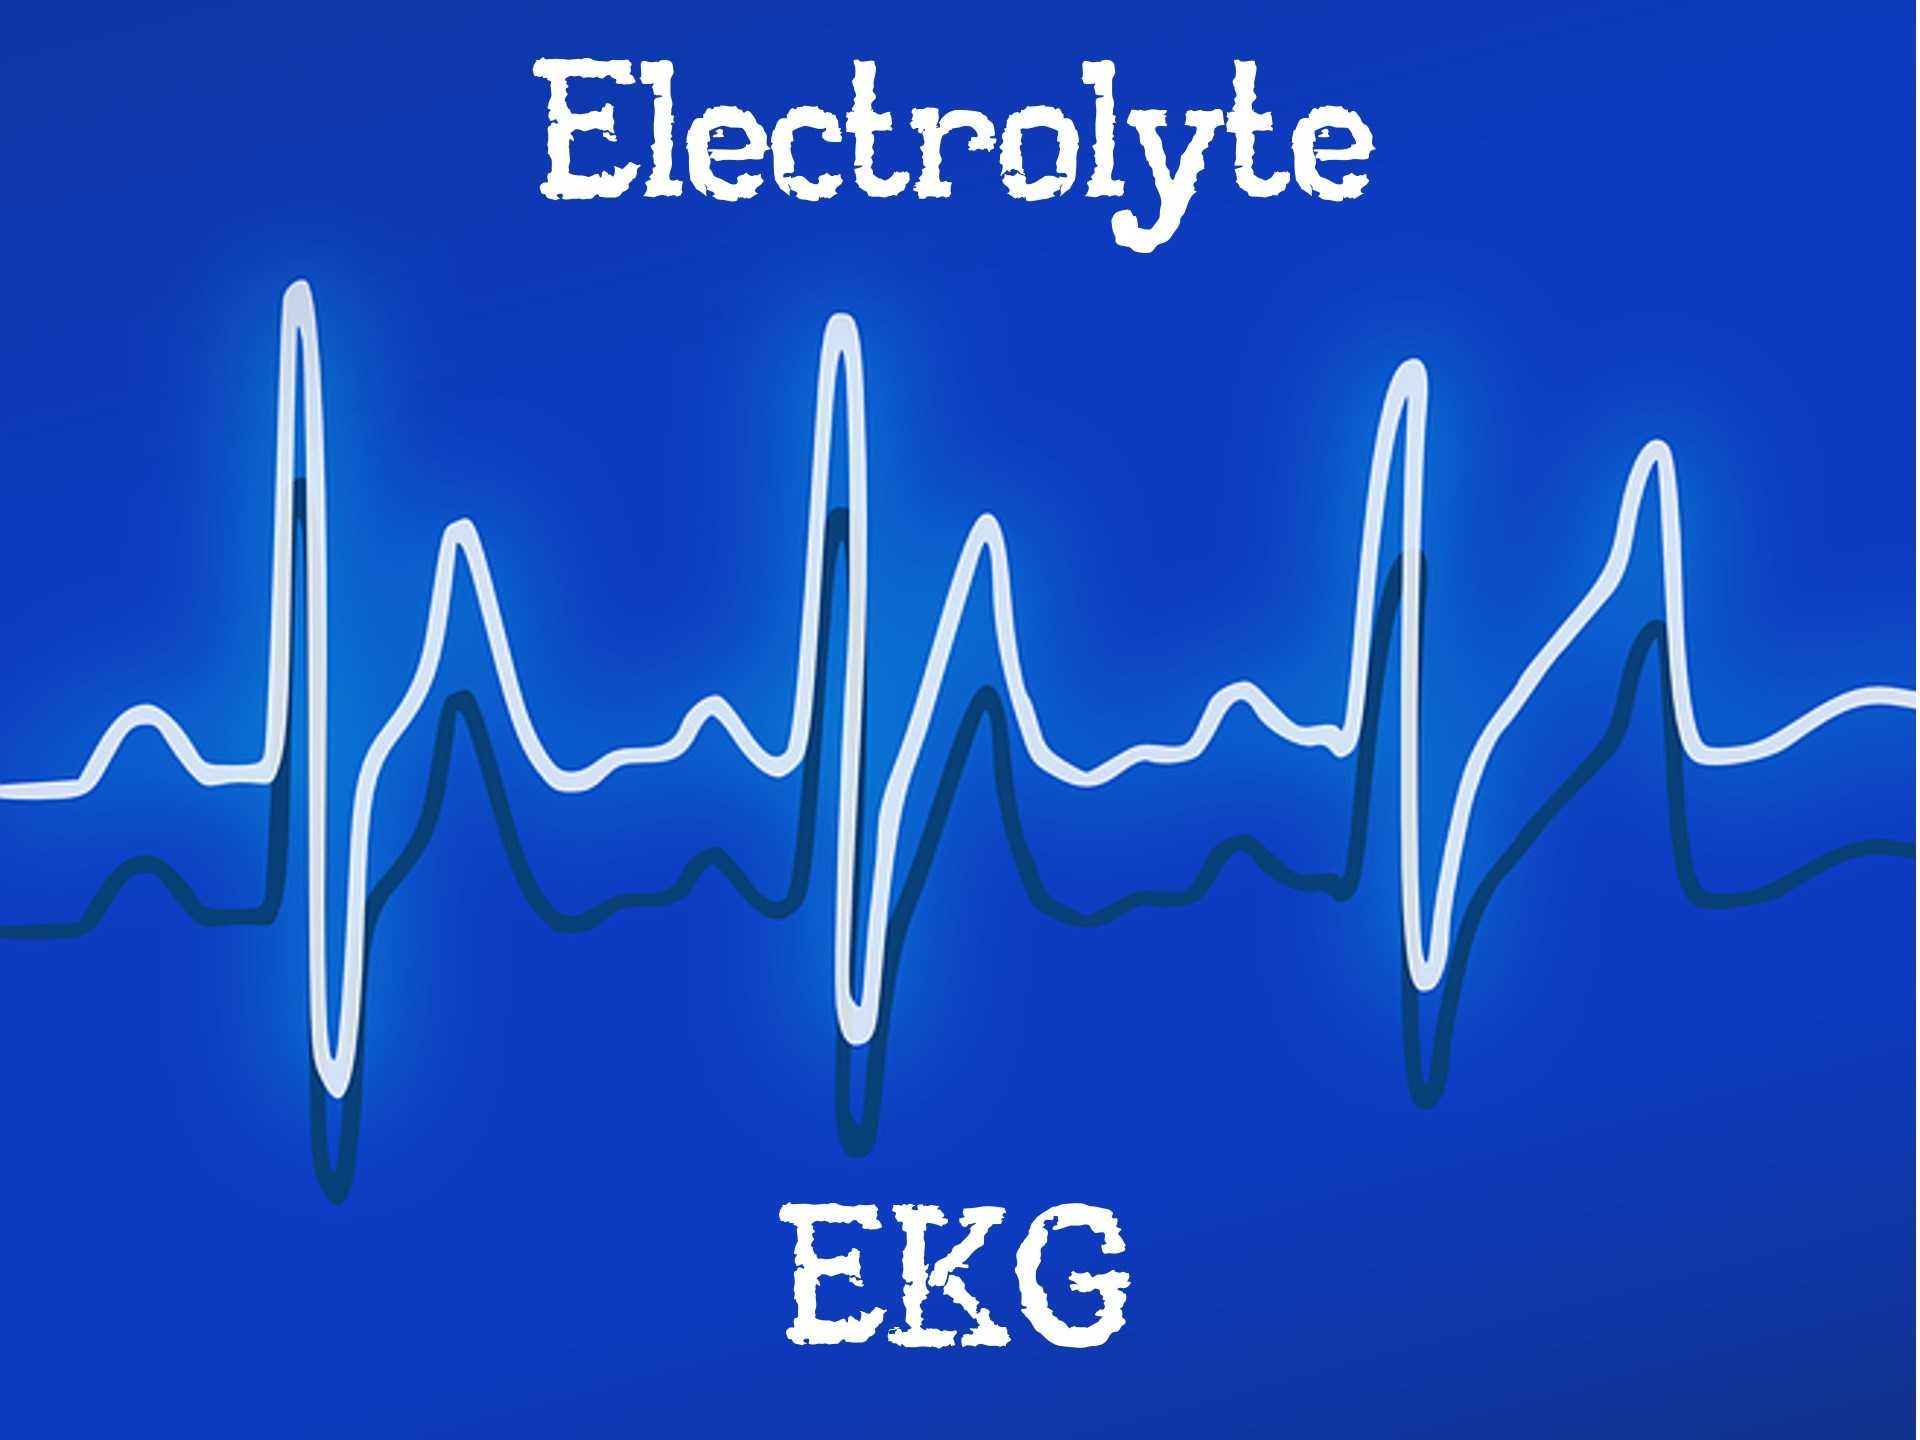 Characteristics Of Bacteria Worksheet Answer Key together with Electrolyte Ekg Core Content